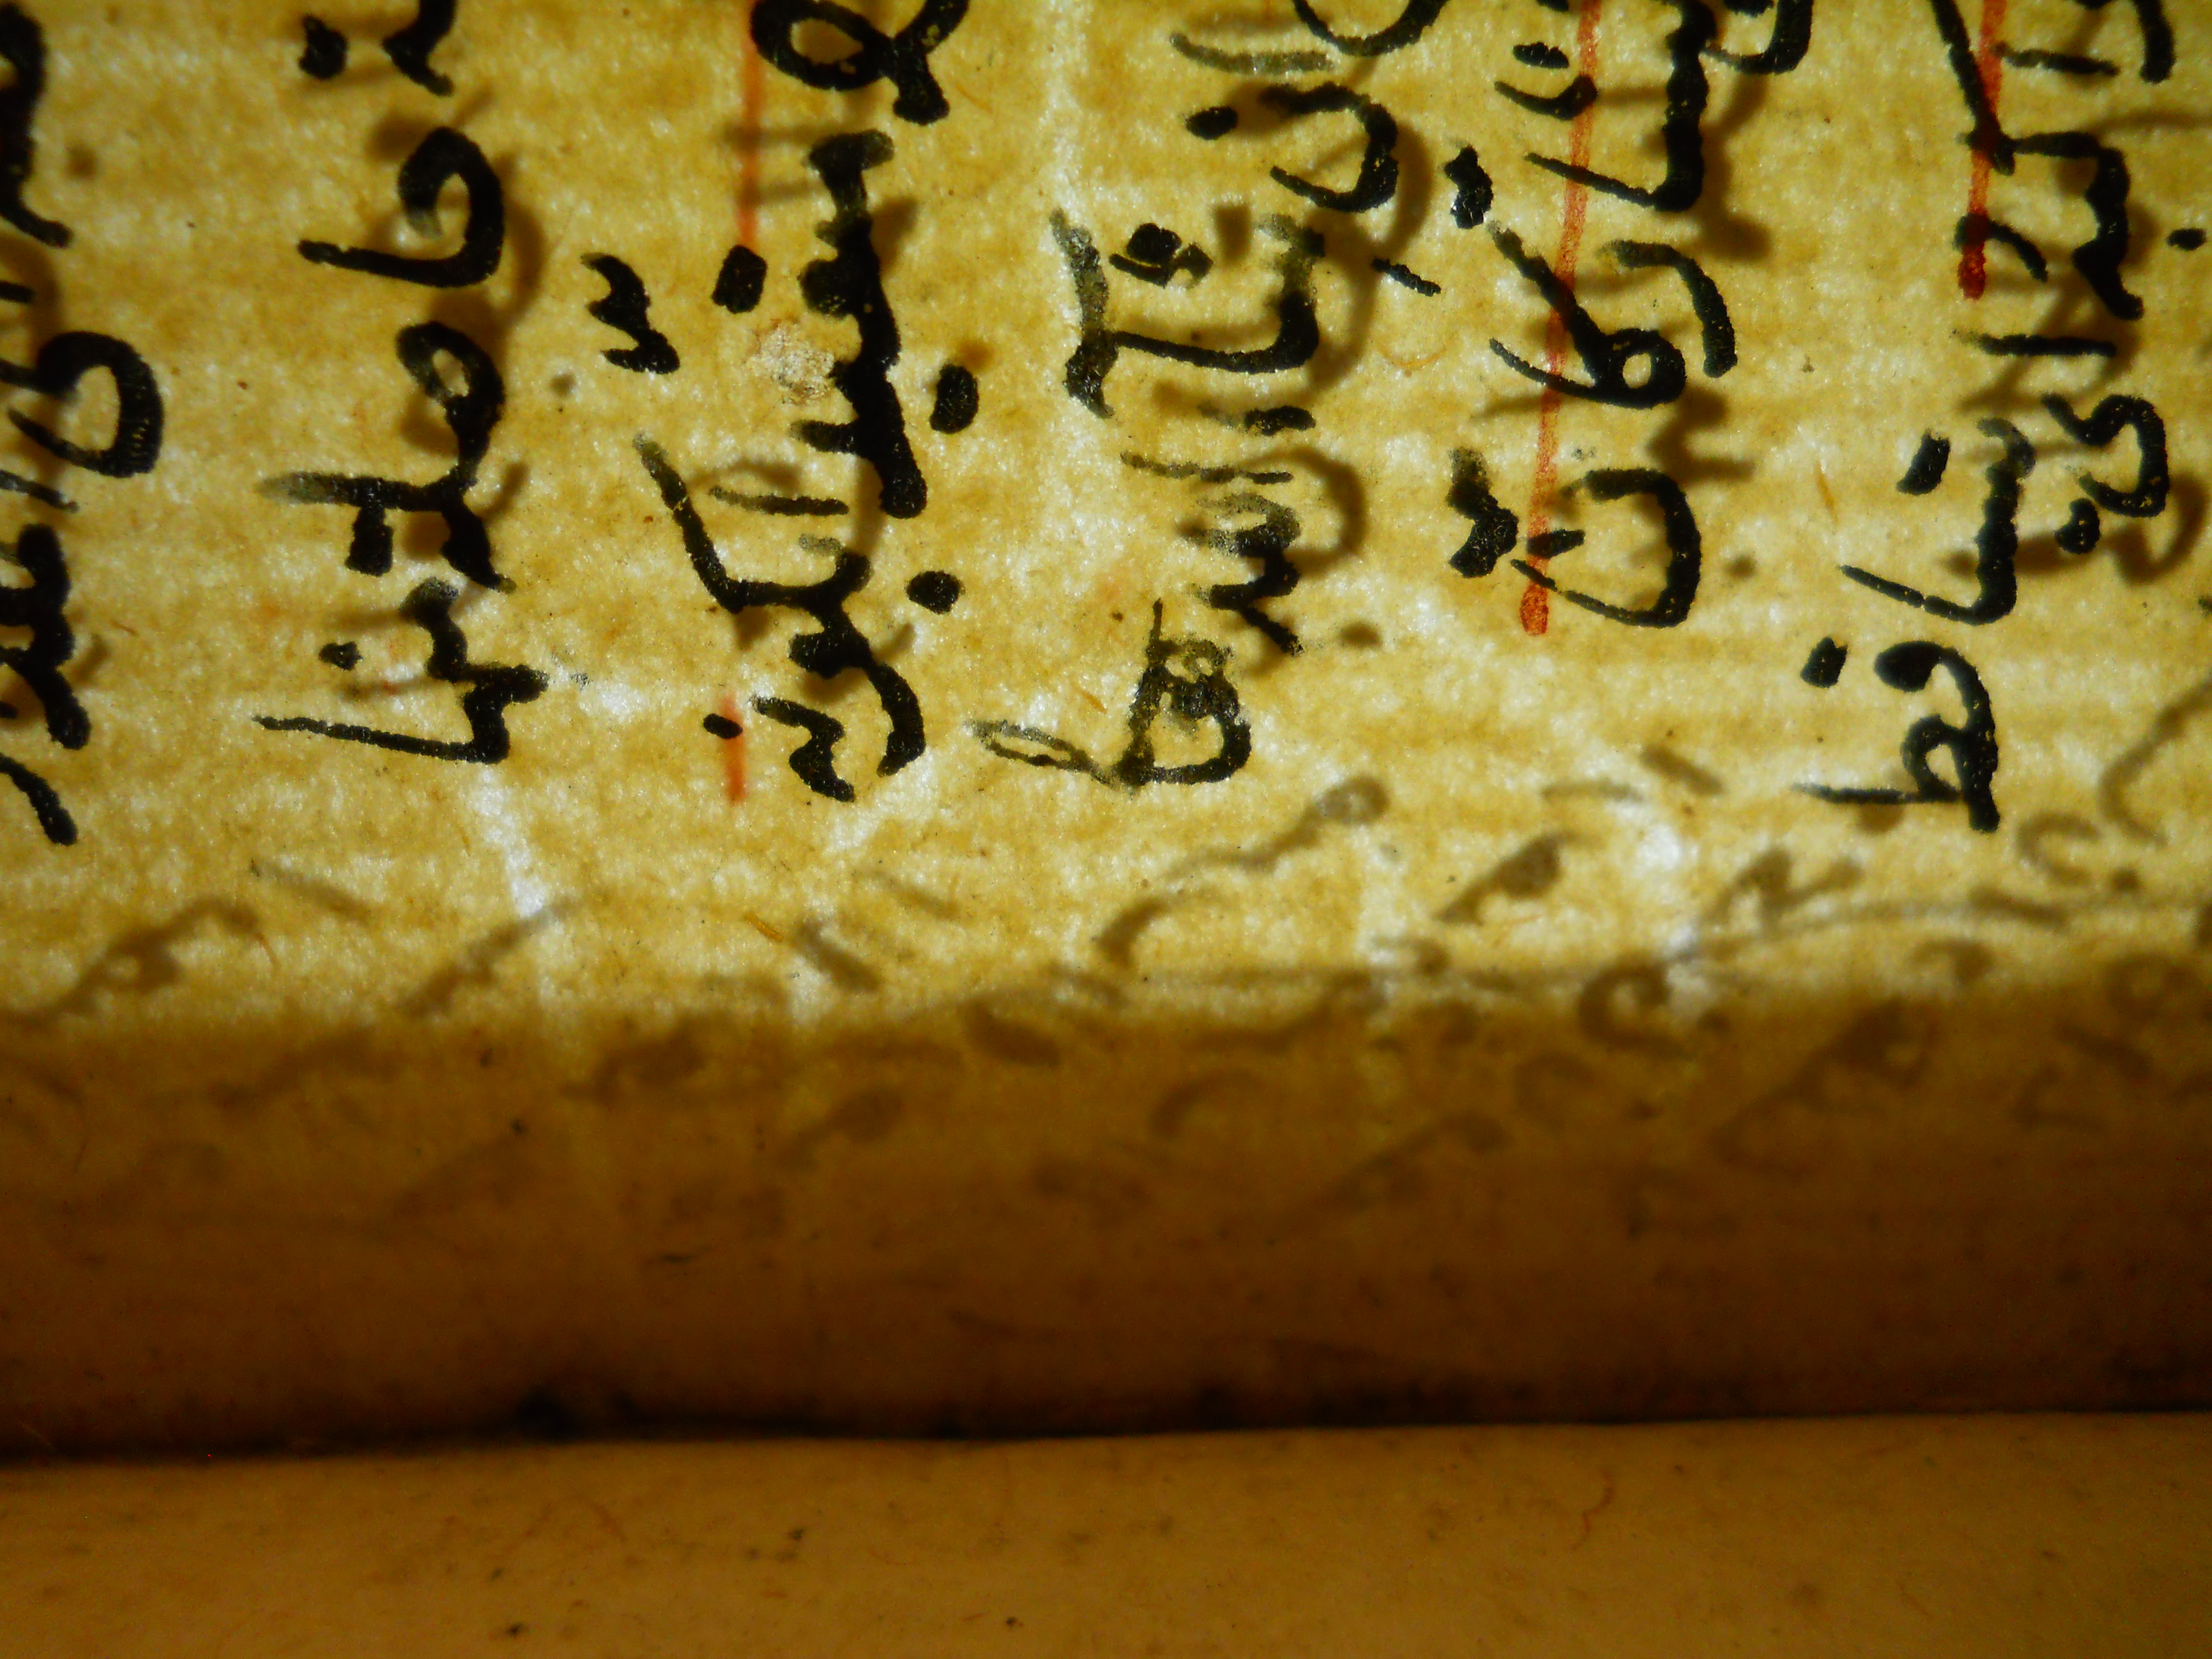 Upper part of capital letter R visible near the gutter in p.210 of Isl. Ms. 147